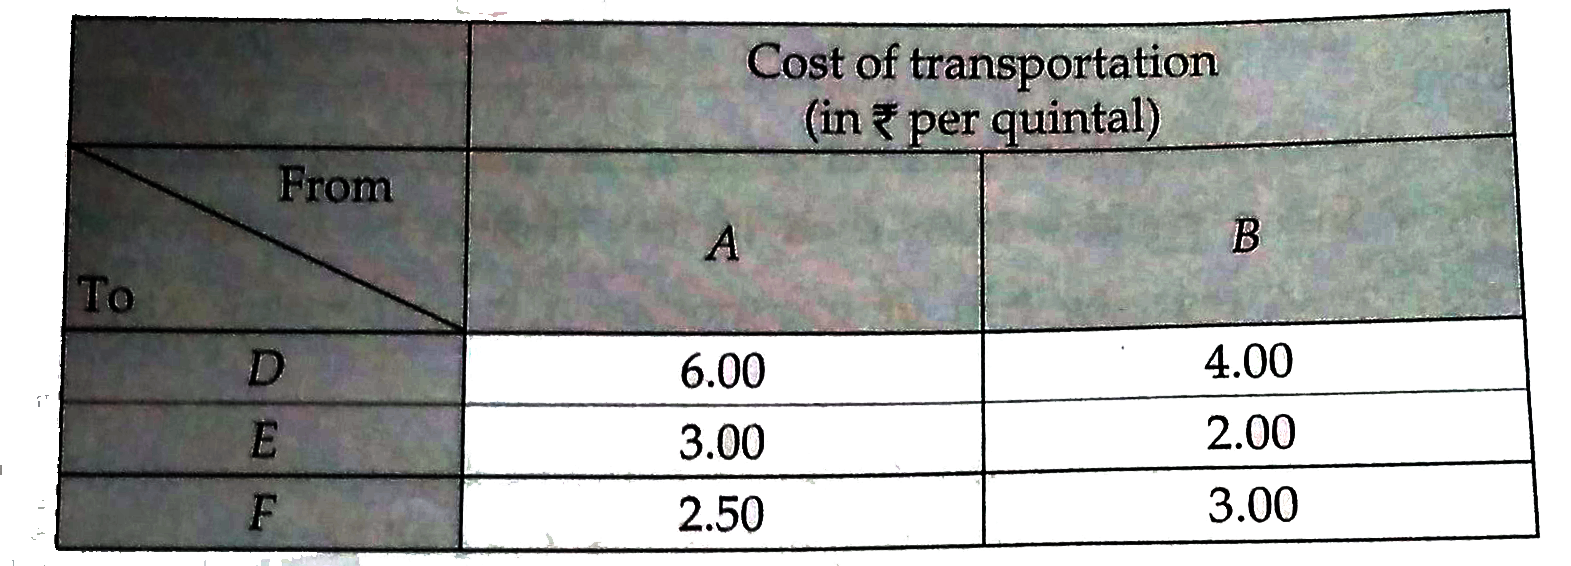 Two godowns A and B have grain capacity of 100 quintals and 50 quintals respectively. They supply to 3 ration shops, D,E and F whose requirements are 60,50 and 40 quintals respectively. The cost of transportation per quintal from the godowns to the shops are given in the following table:.   <img src=